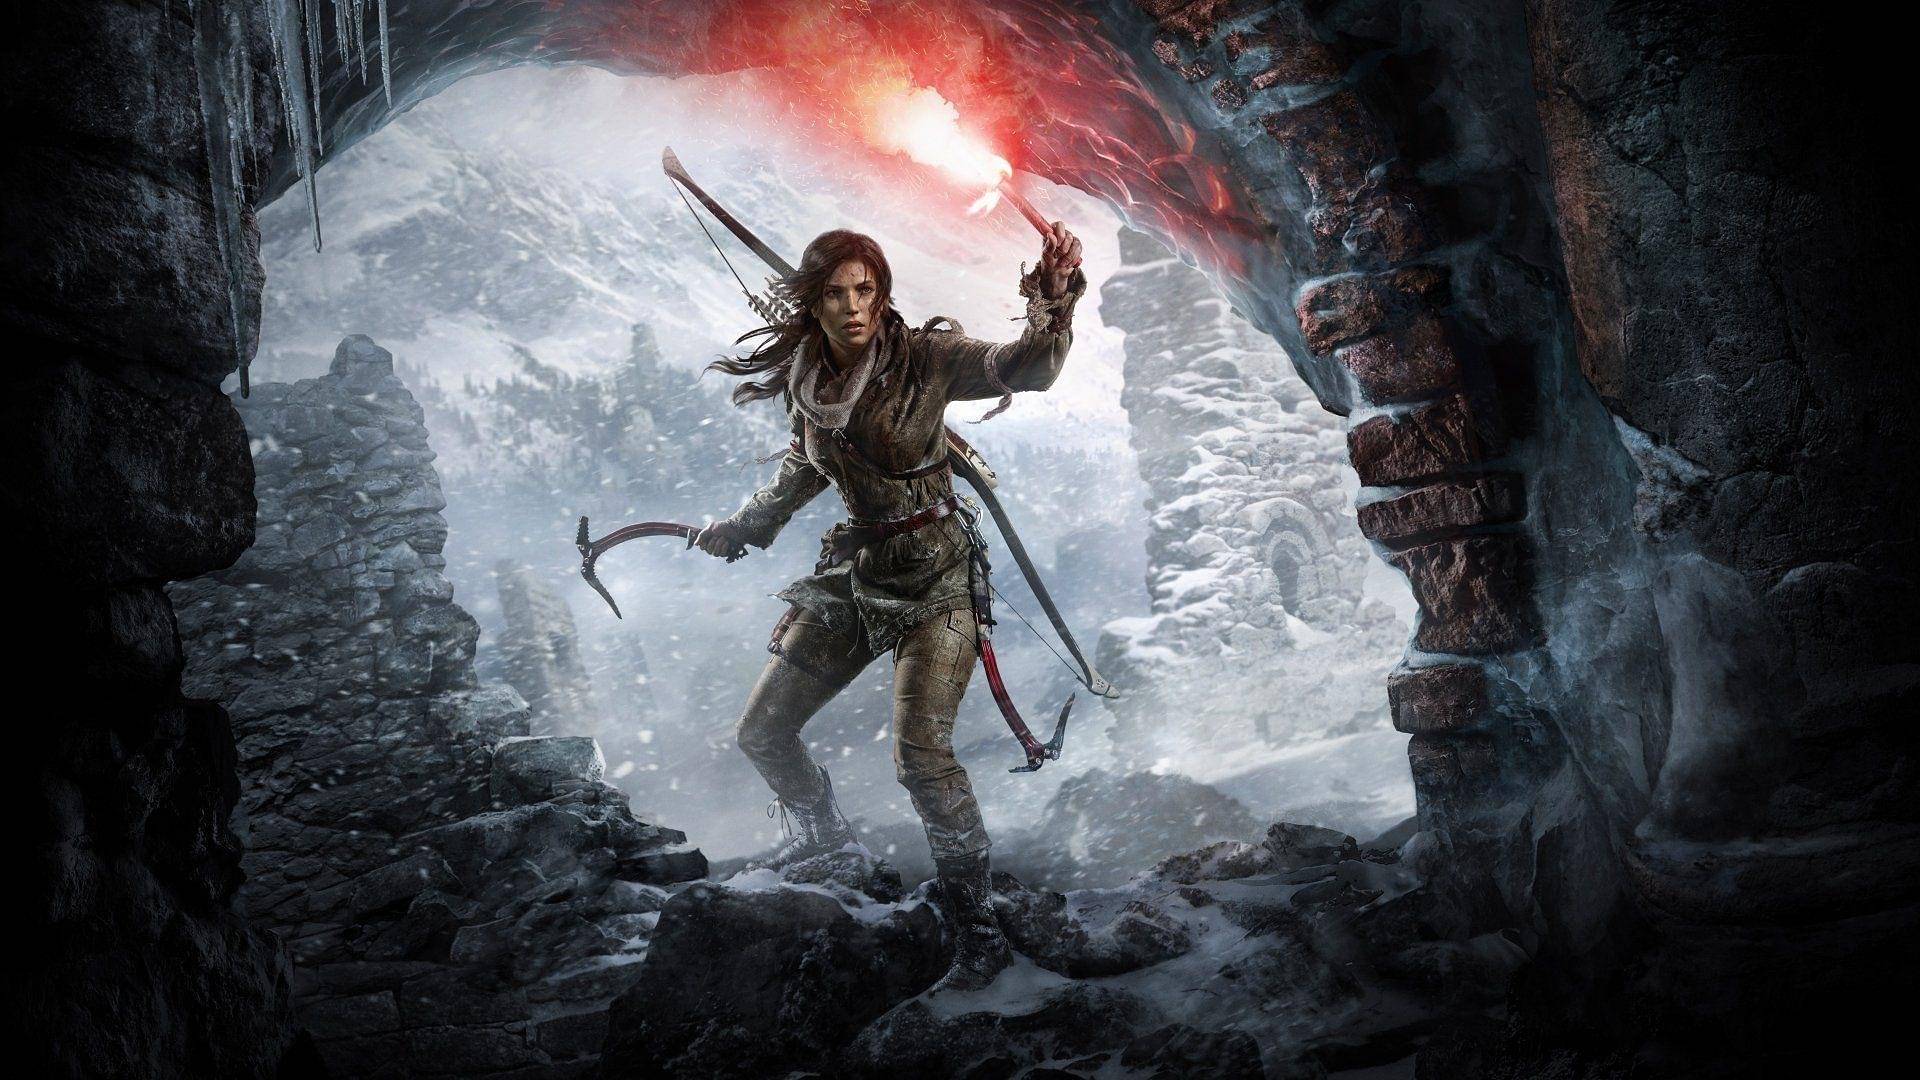 An image of the Rise of the Tomb Raider Poster